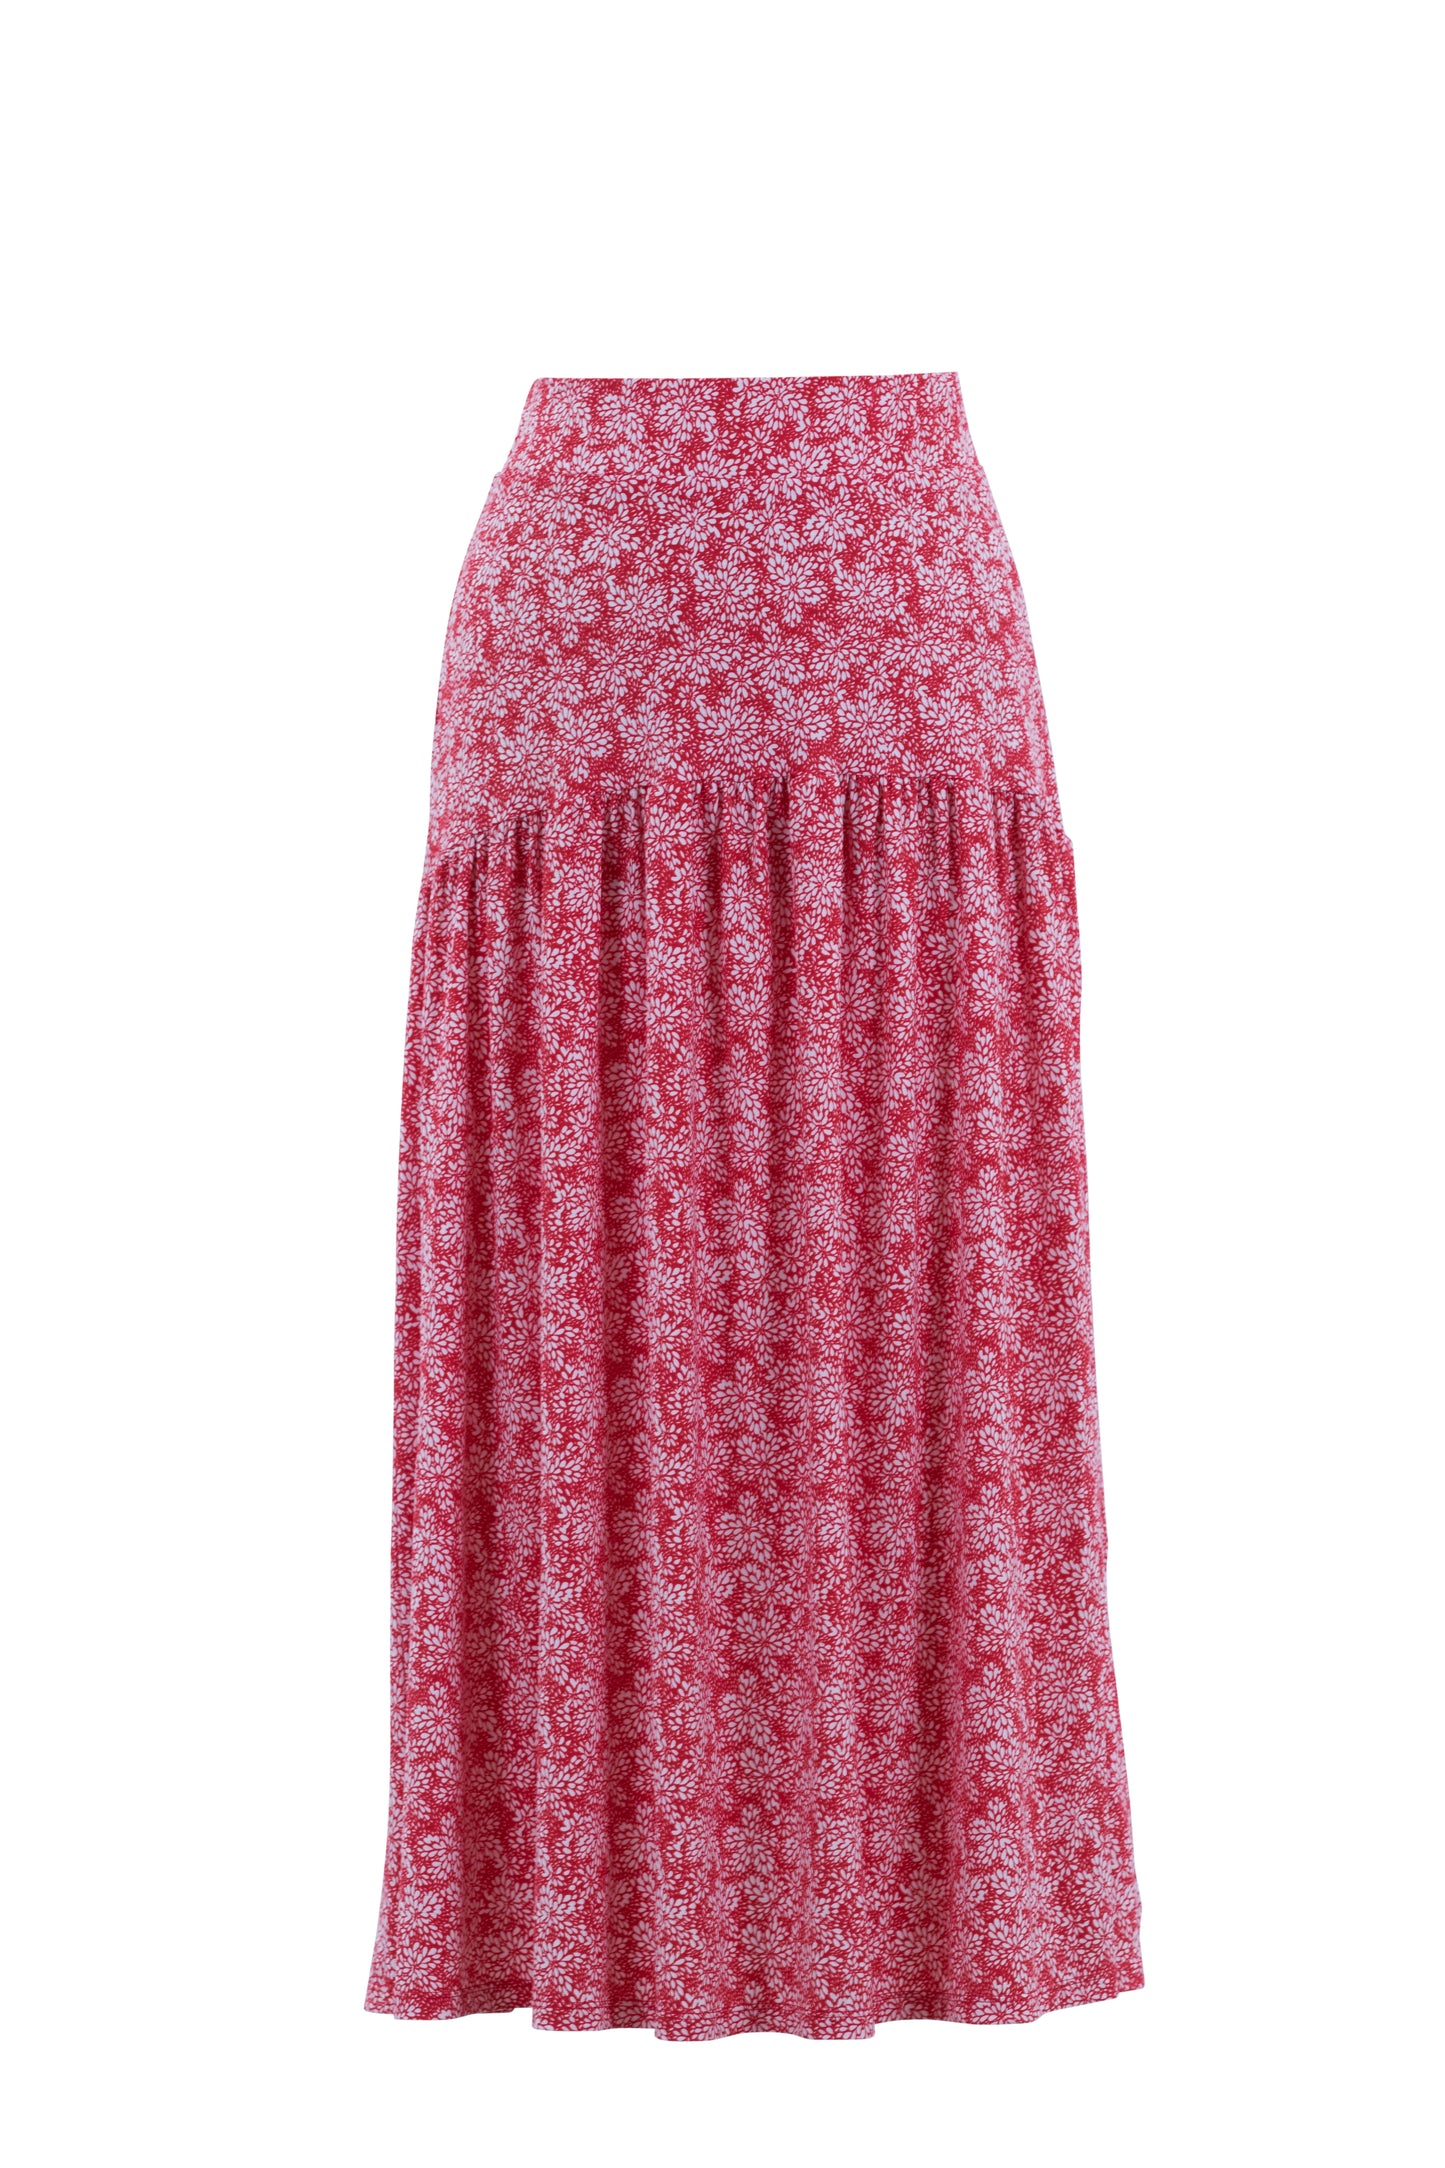 Floral Midi-Skirt in Red/white